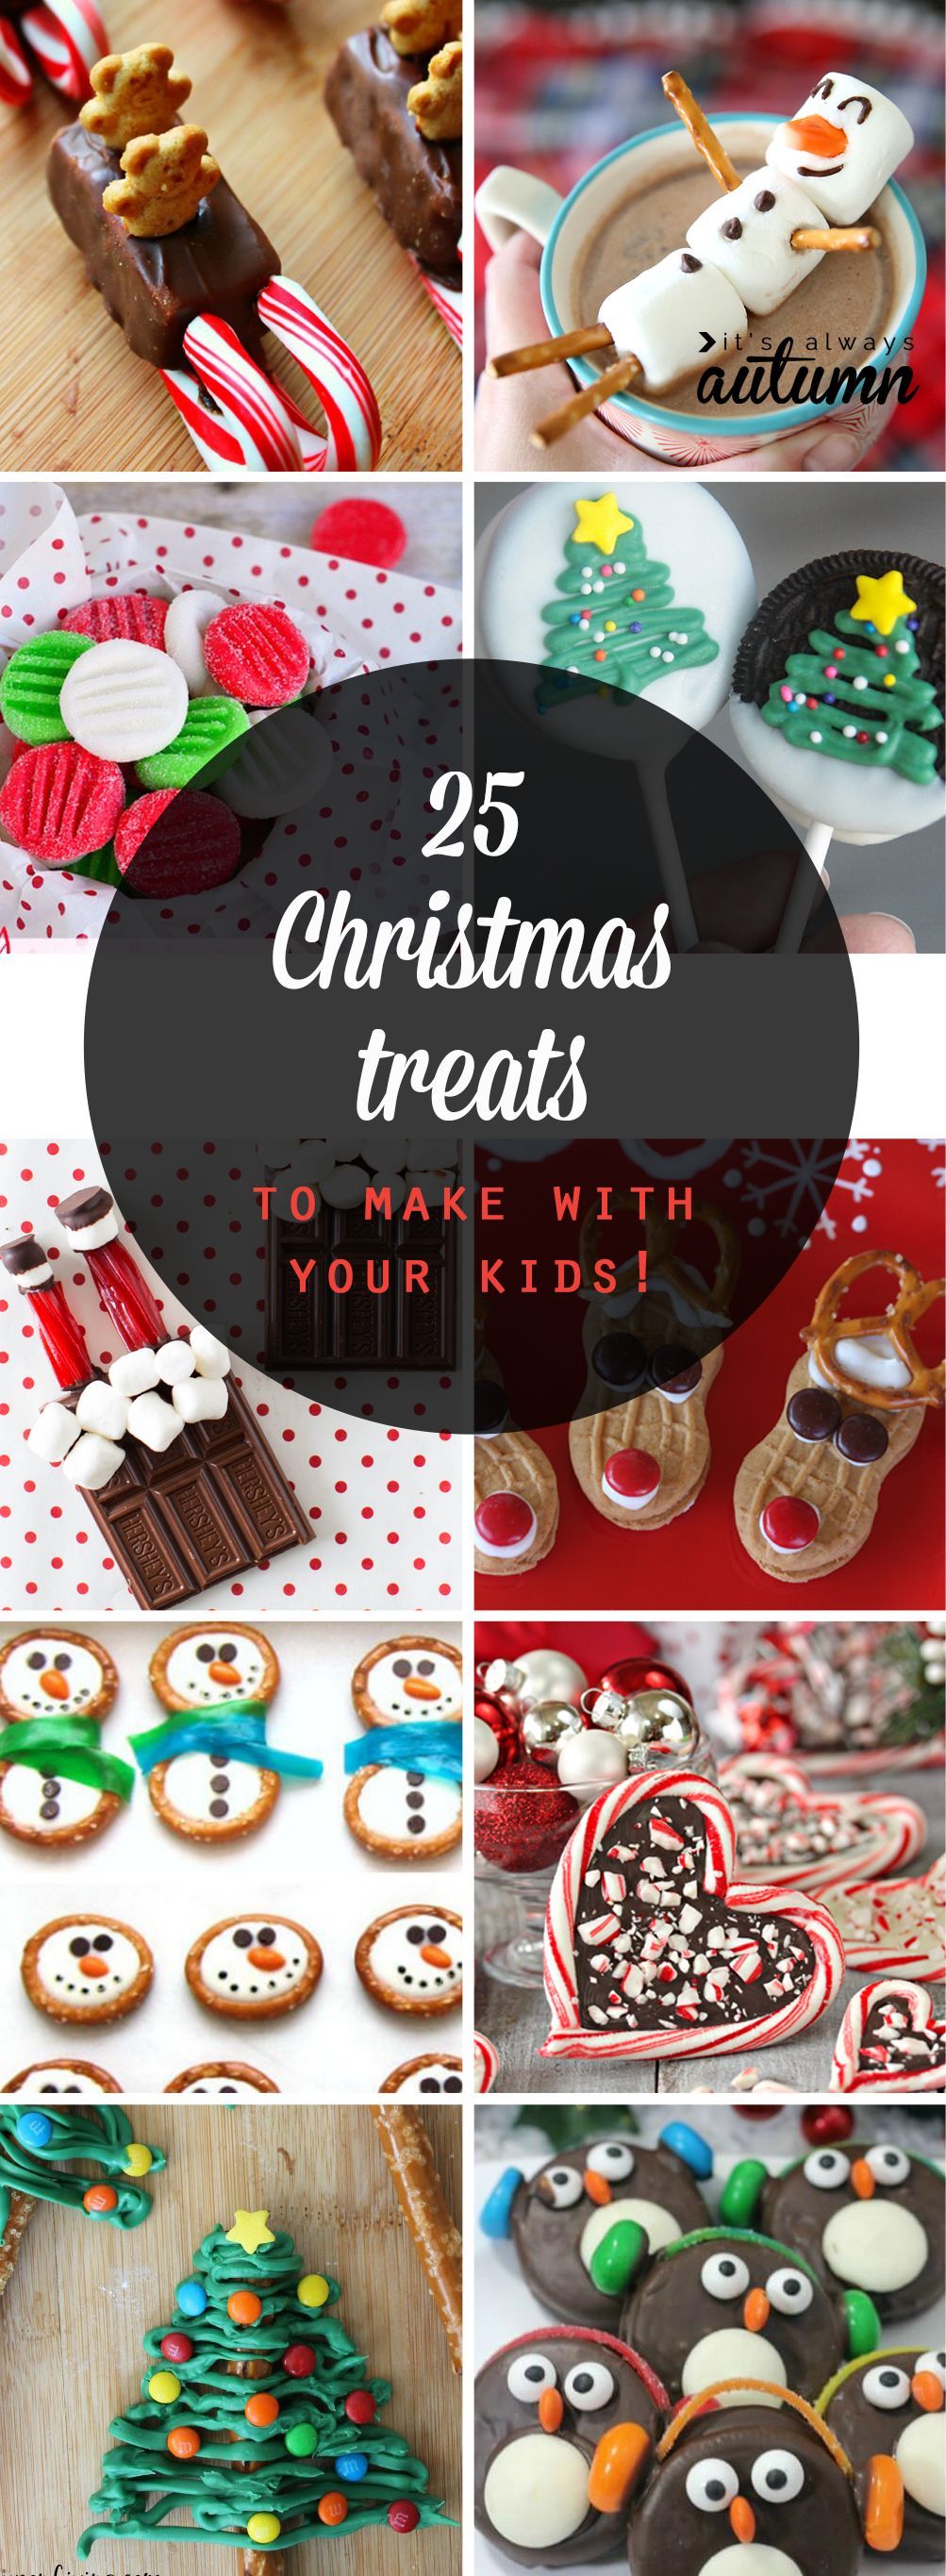 25 adorable Christmas treats to make with your kids - It's Always Autumn - 25 adorable Christmas treats to make with your kids - It's Always Autumn -   19 diy Christmas treats ideas